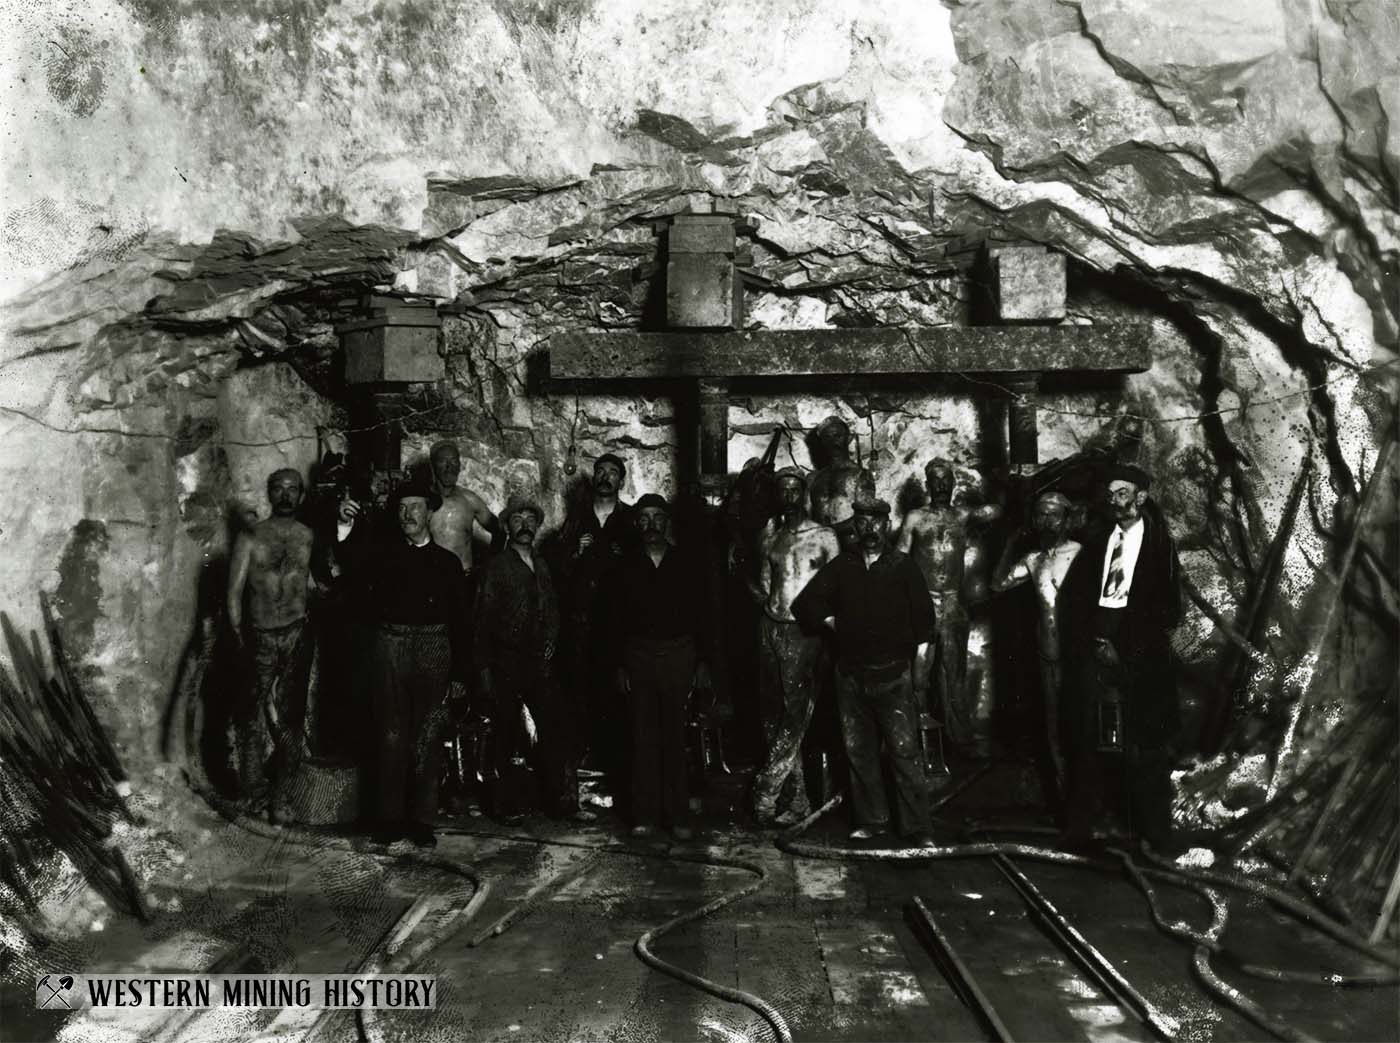 Miners of the Comstock Lode ca. 1870s